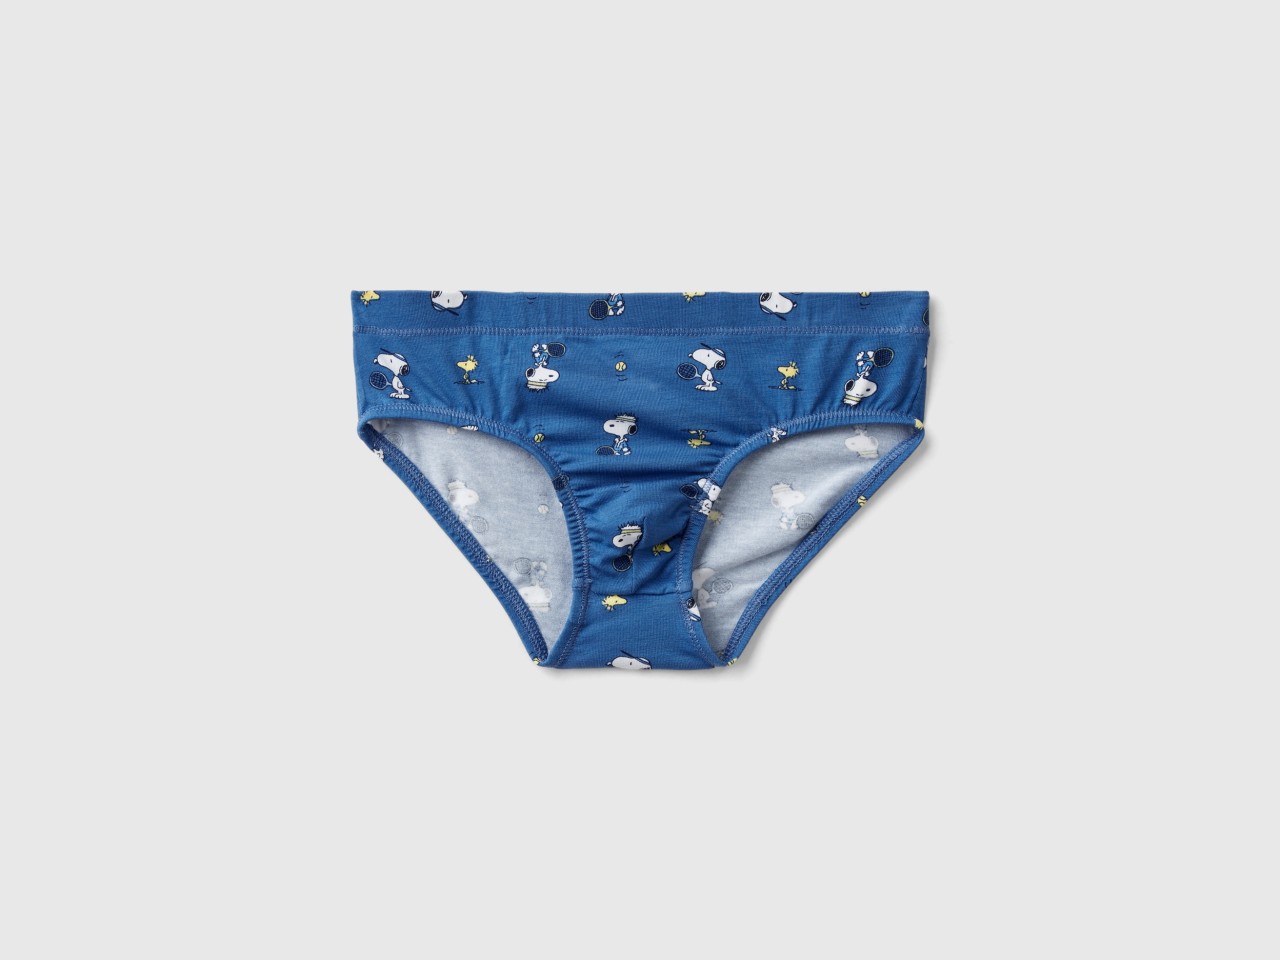 Buy TwoLover, Baby Girl's & Baby Boy's Kids Brief Multicolor Panty